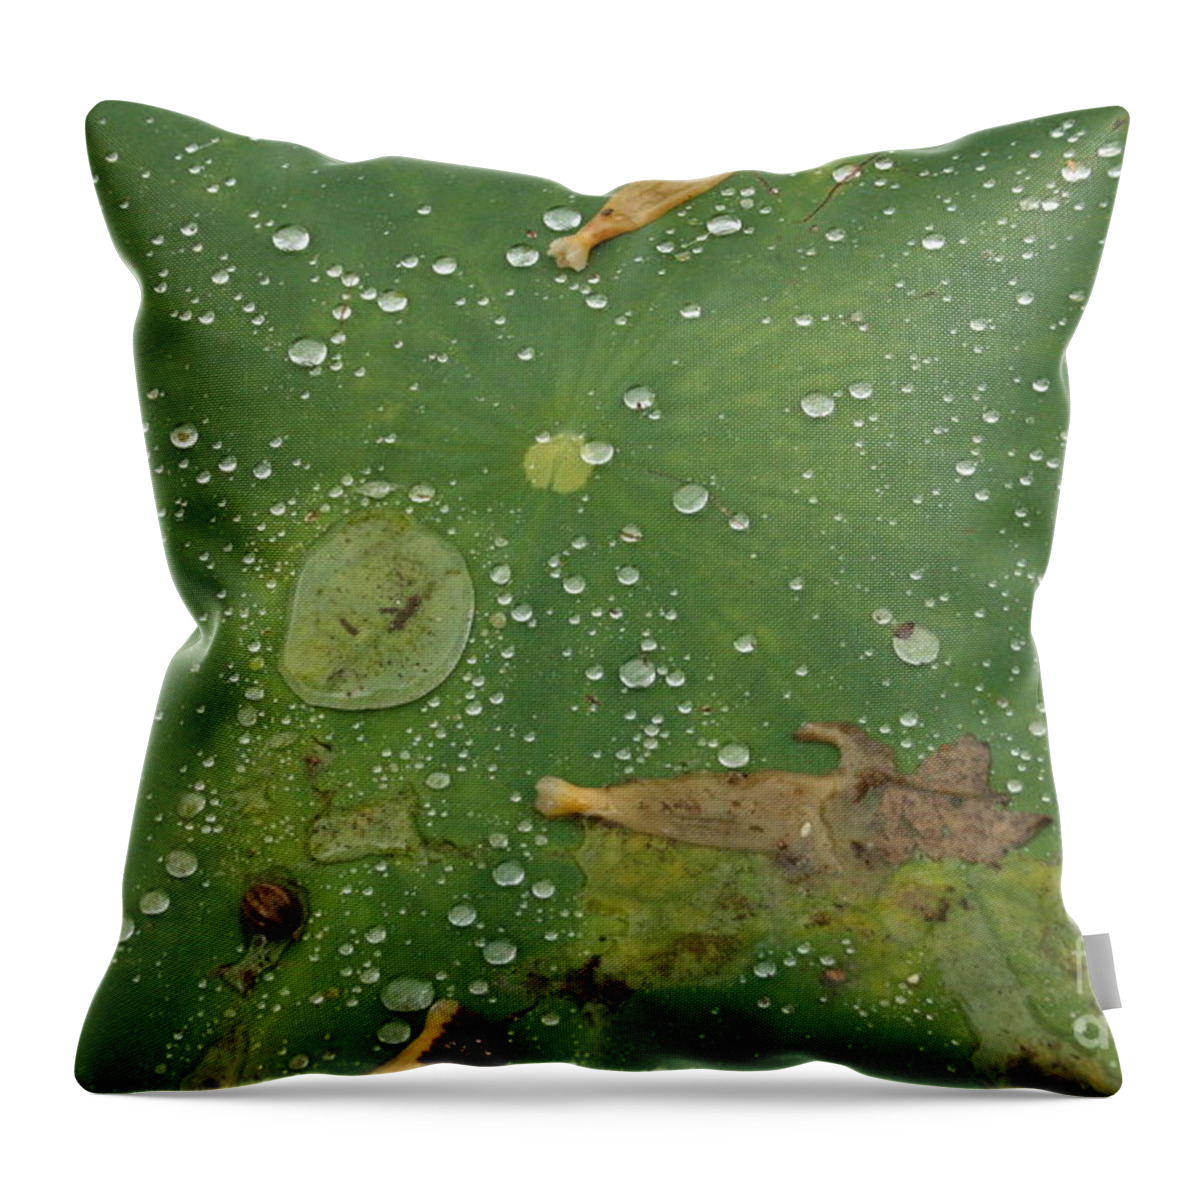 Hawaiian Lilly Pads Throw Pillow featuring the photograph Hawaiian Lilly Pad 2 by Jennifer Bright Burr